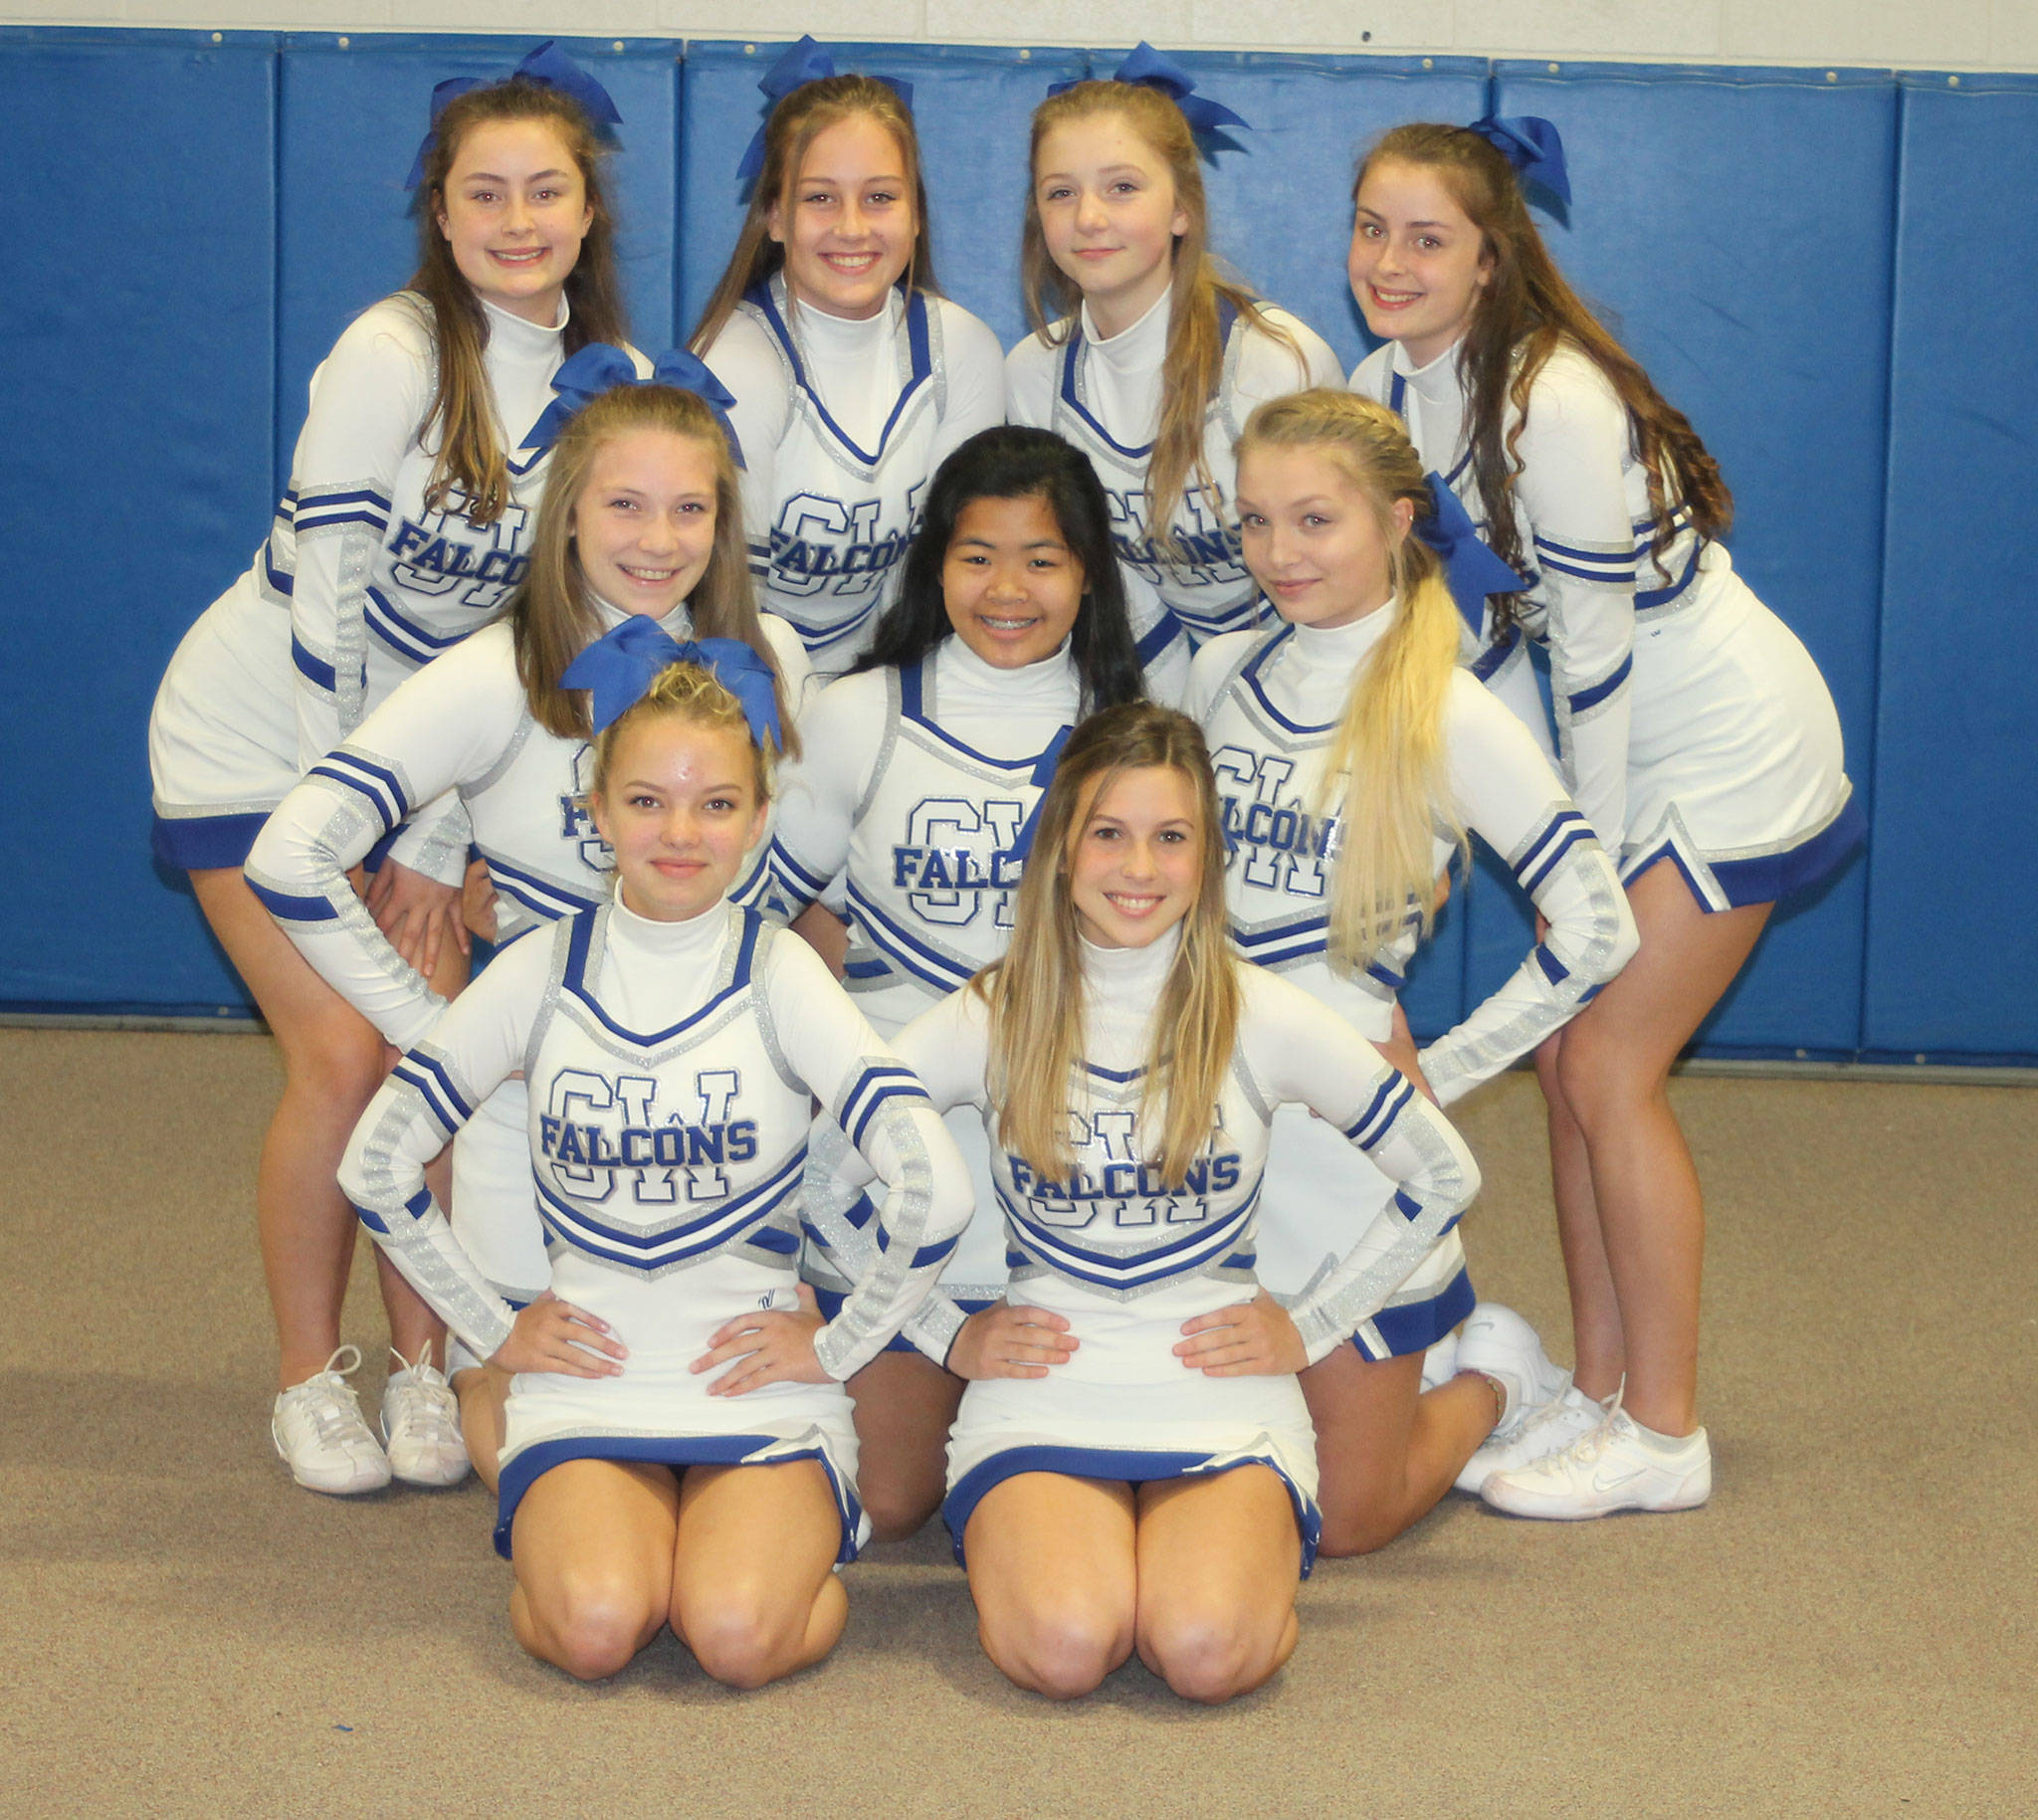 The 2018 South Whidbey fall cheer team — front row, left to right: Charlotte Gloster, Erin Brewer; middle row: Niki Greene, Calyna Saephan, Trinity Krouse; back Row: Bronte Patty-Caldwell, Ericka Simmons, Ella Bueler, Emma Patty-Caldwell; not pictured: Maya Tschetter. (Photo by Jim Waller/South Whidbey Record)